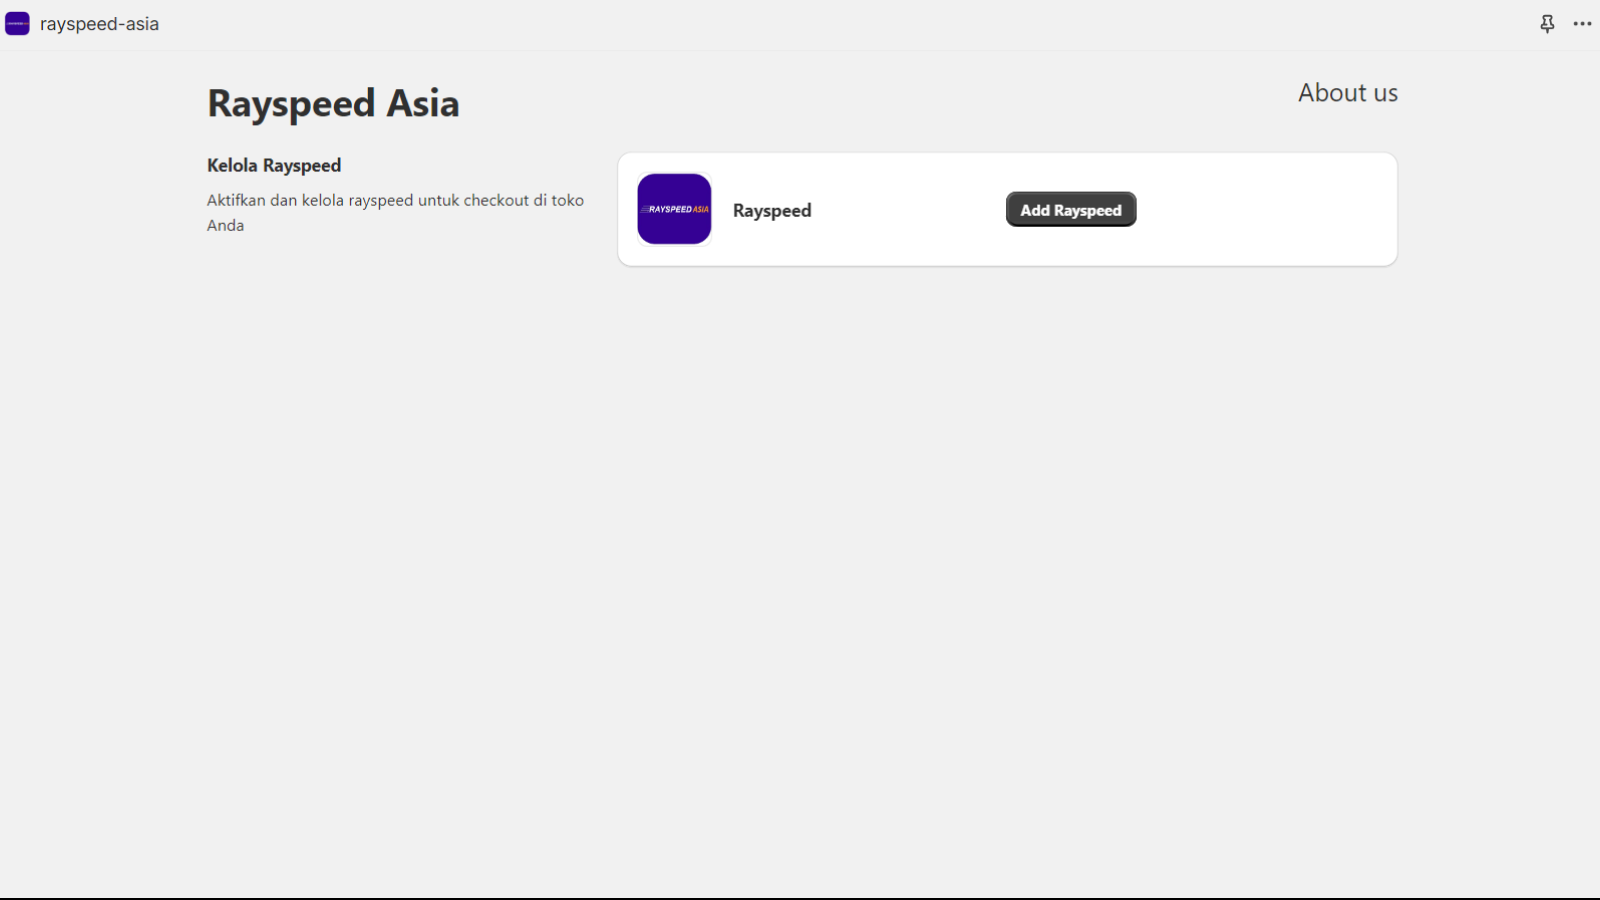 The main interface of Rayspeed Asia app